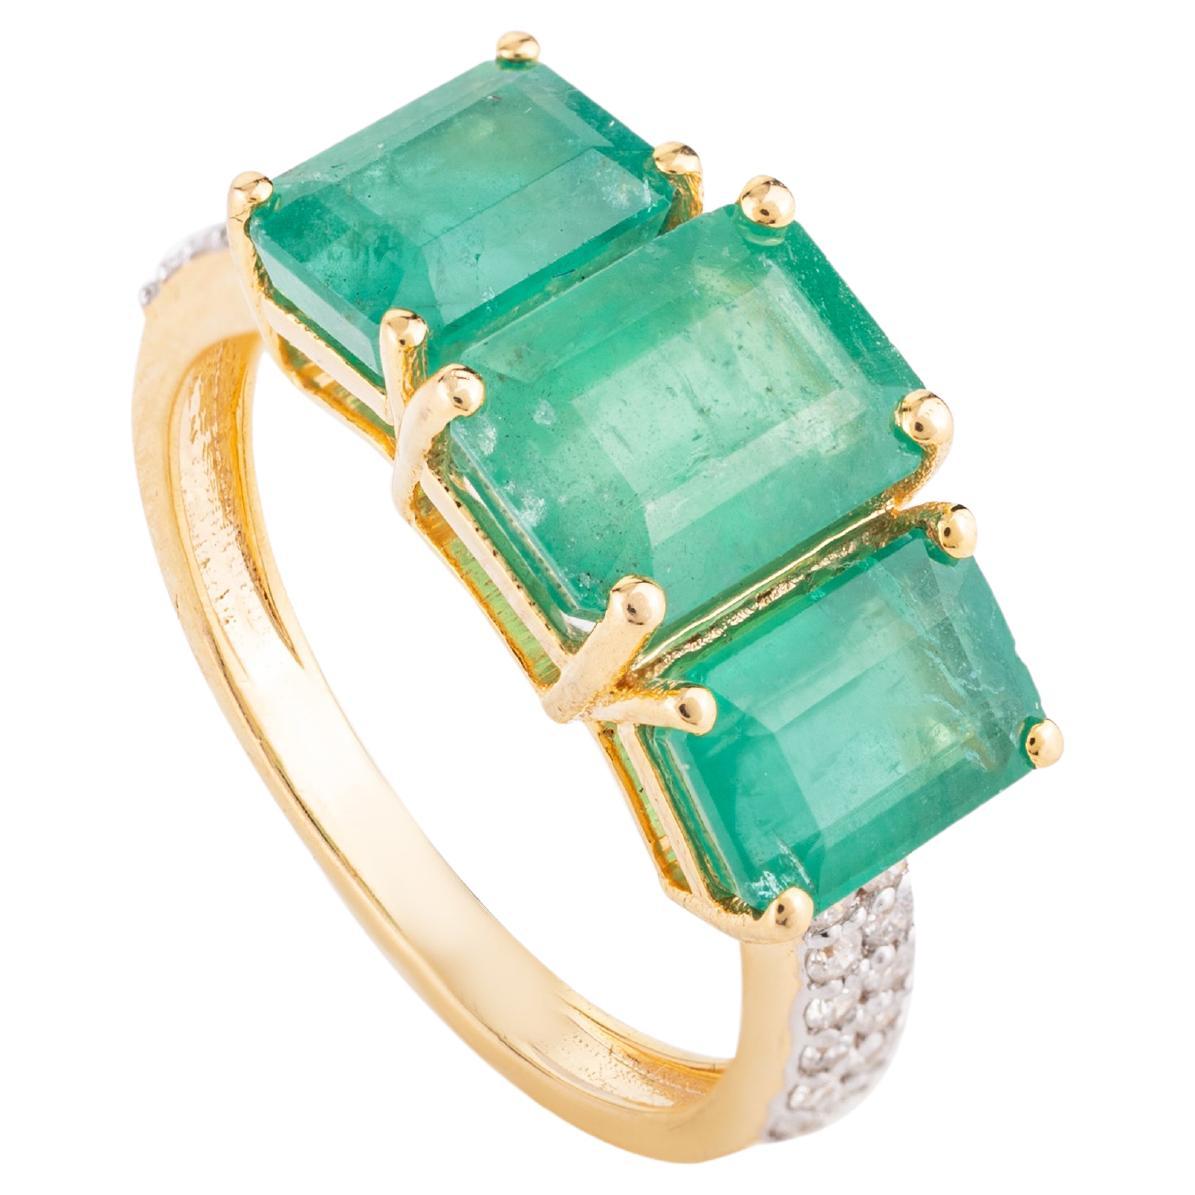 For Sale:  4.14 CTW Three Stone Genuine Emerald Ring with Diamonds in 18k Yellow Gold